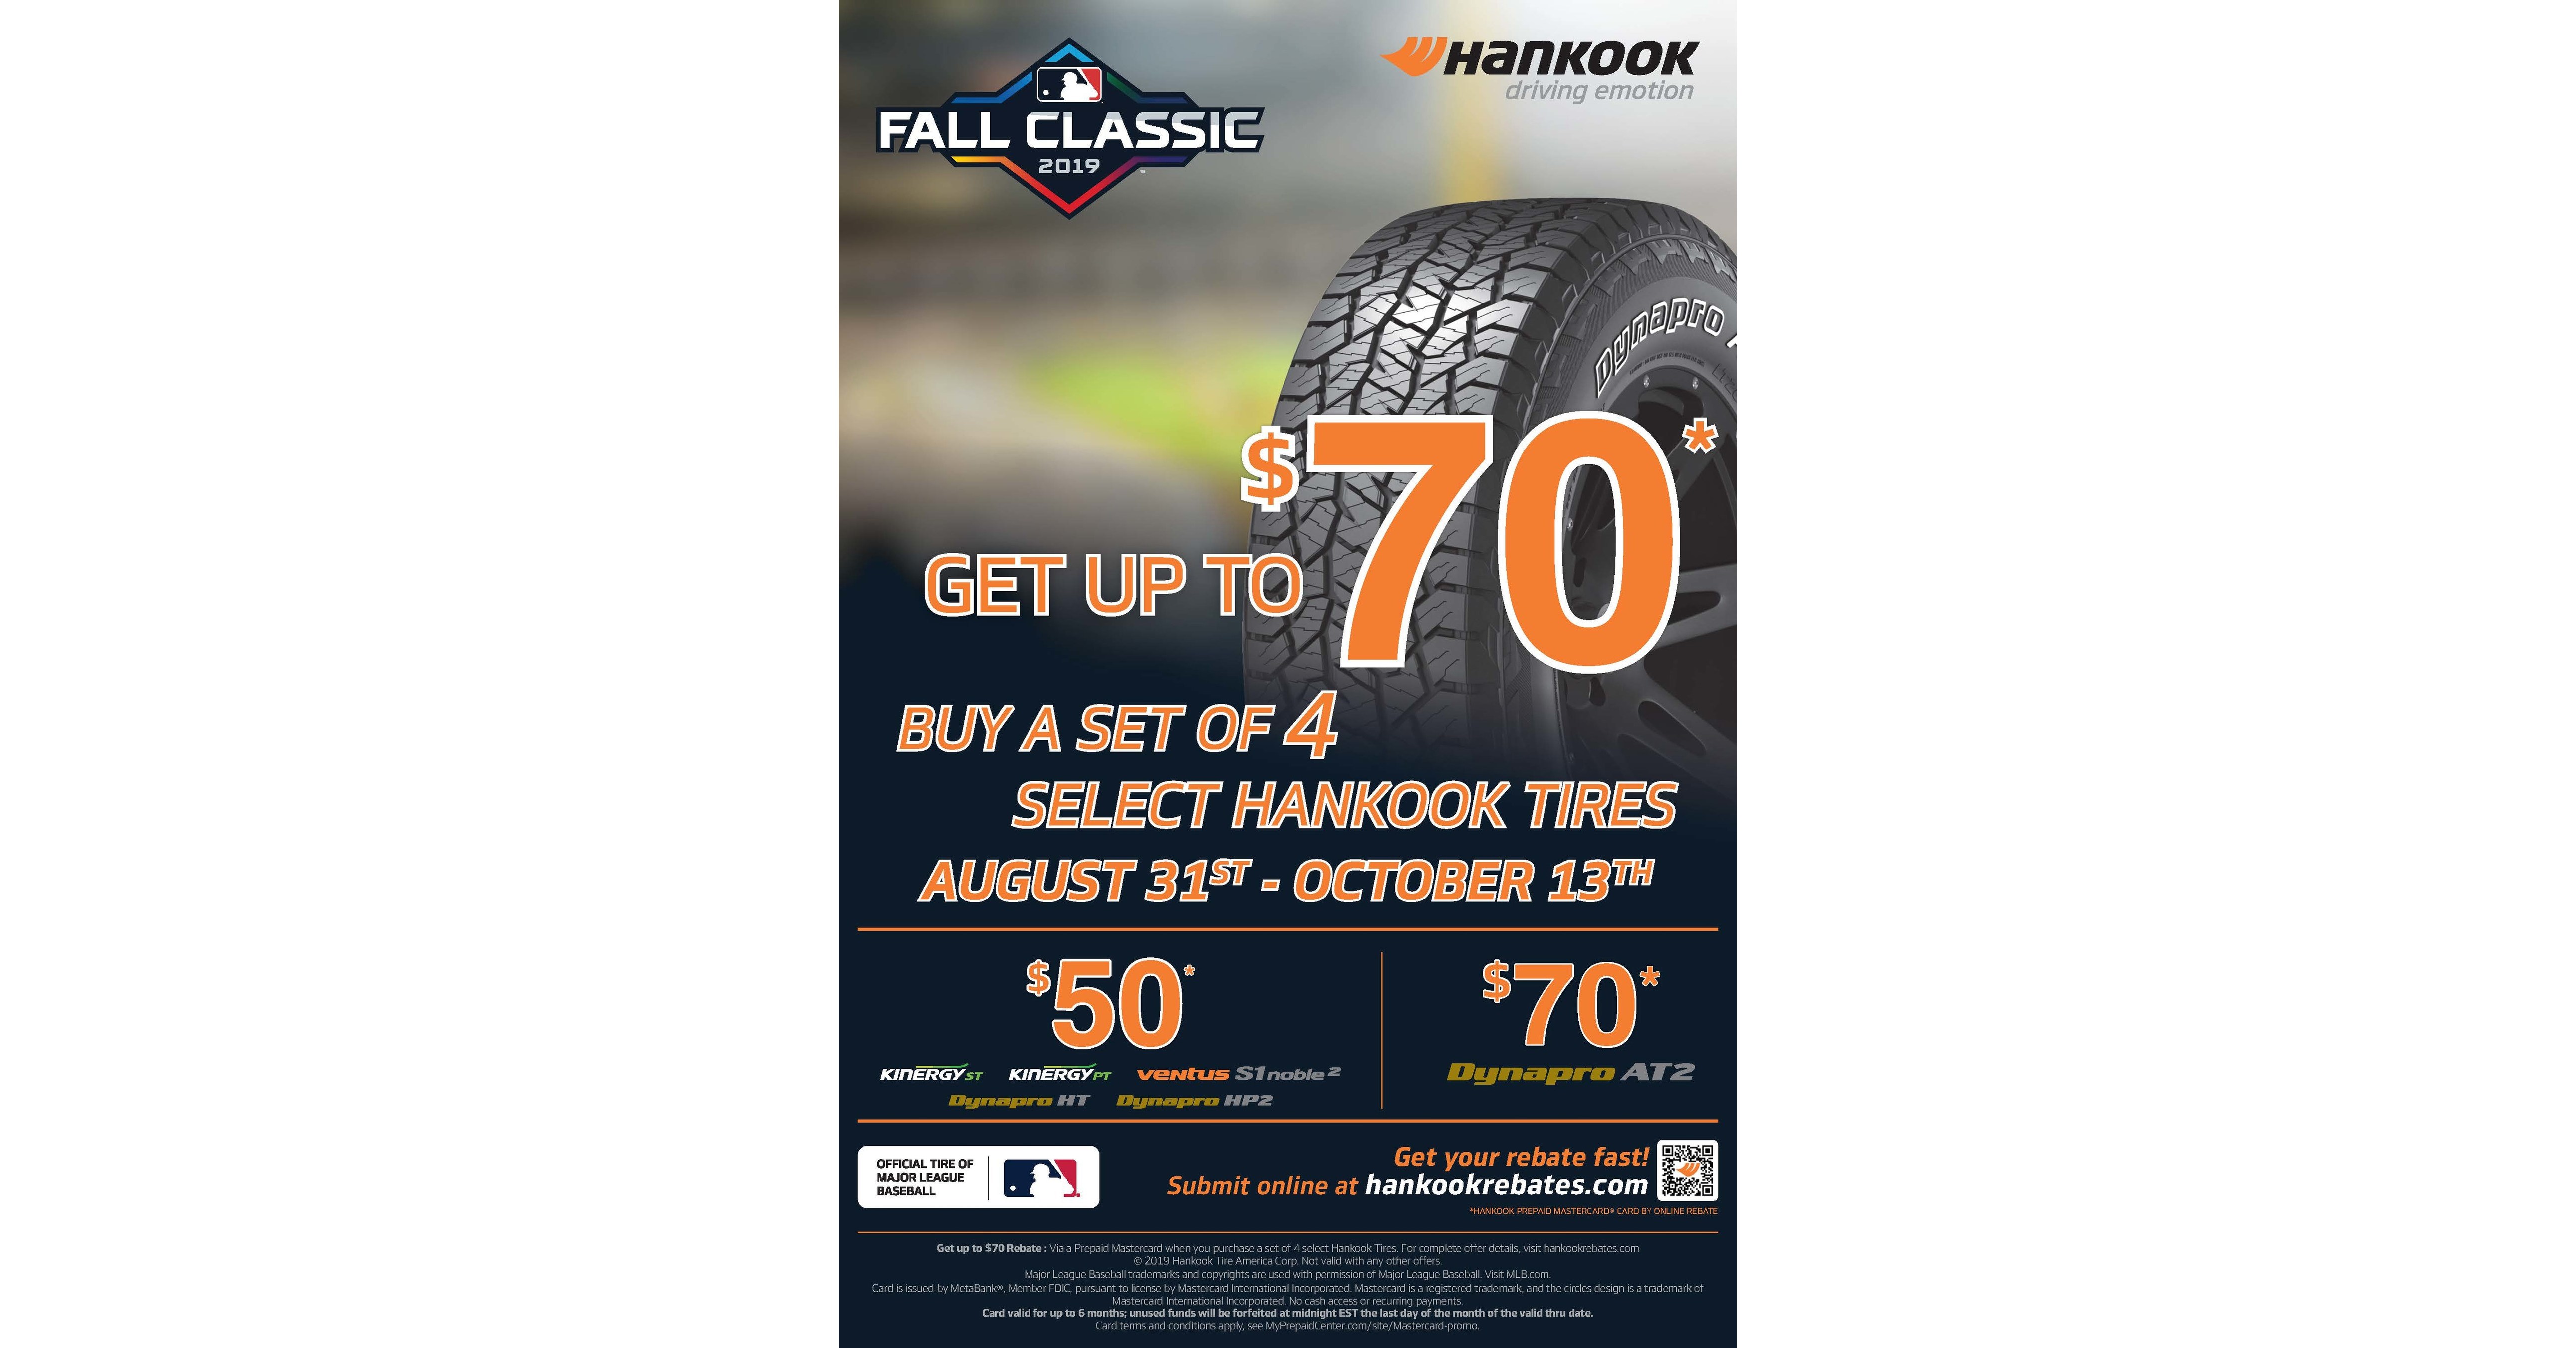 Hankook Tire's Fall Classic Rebate Hits It Out of the Park with